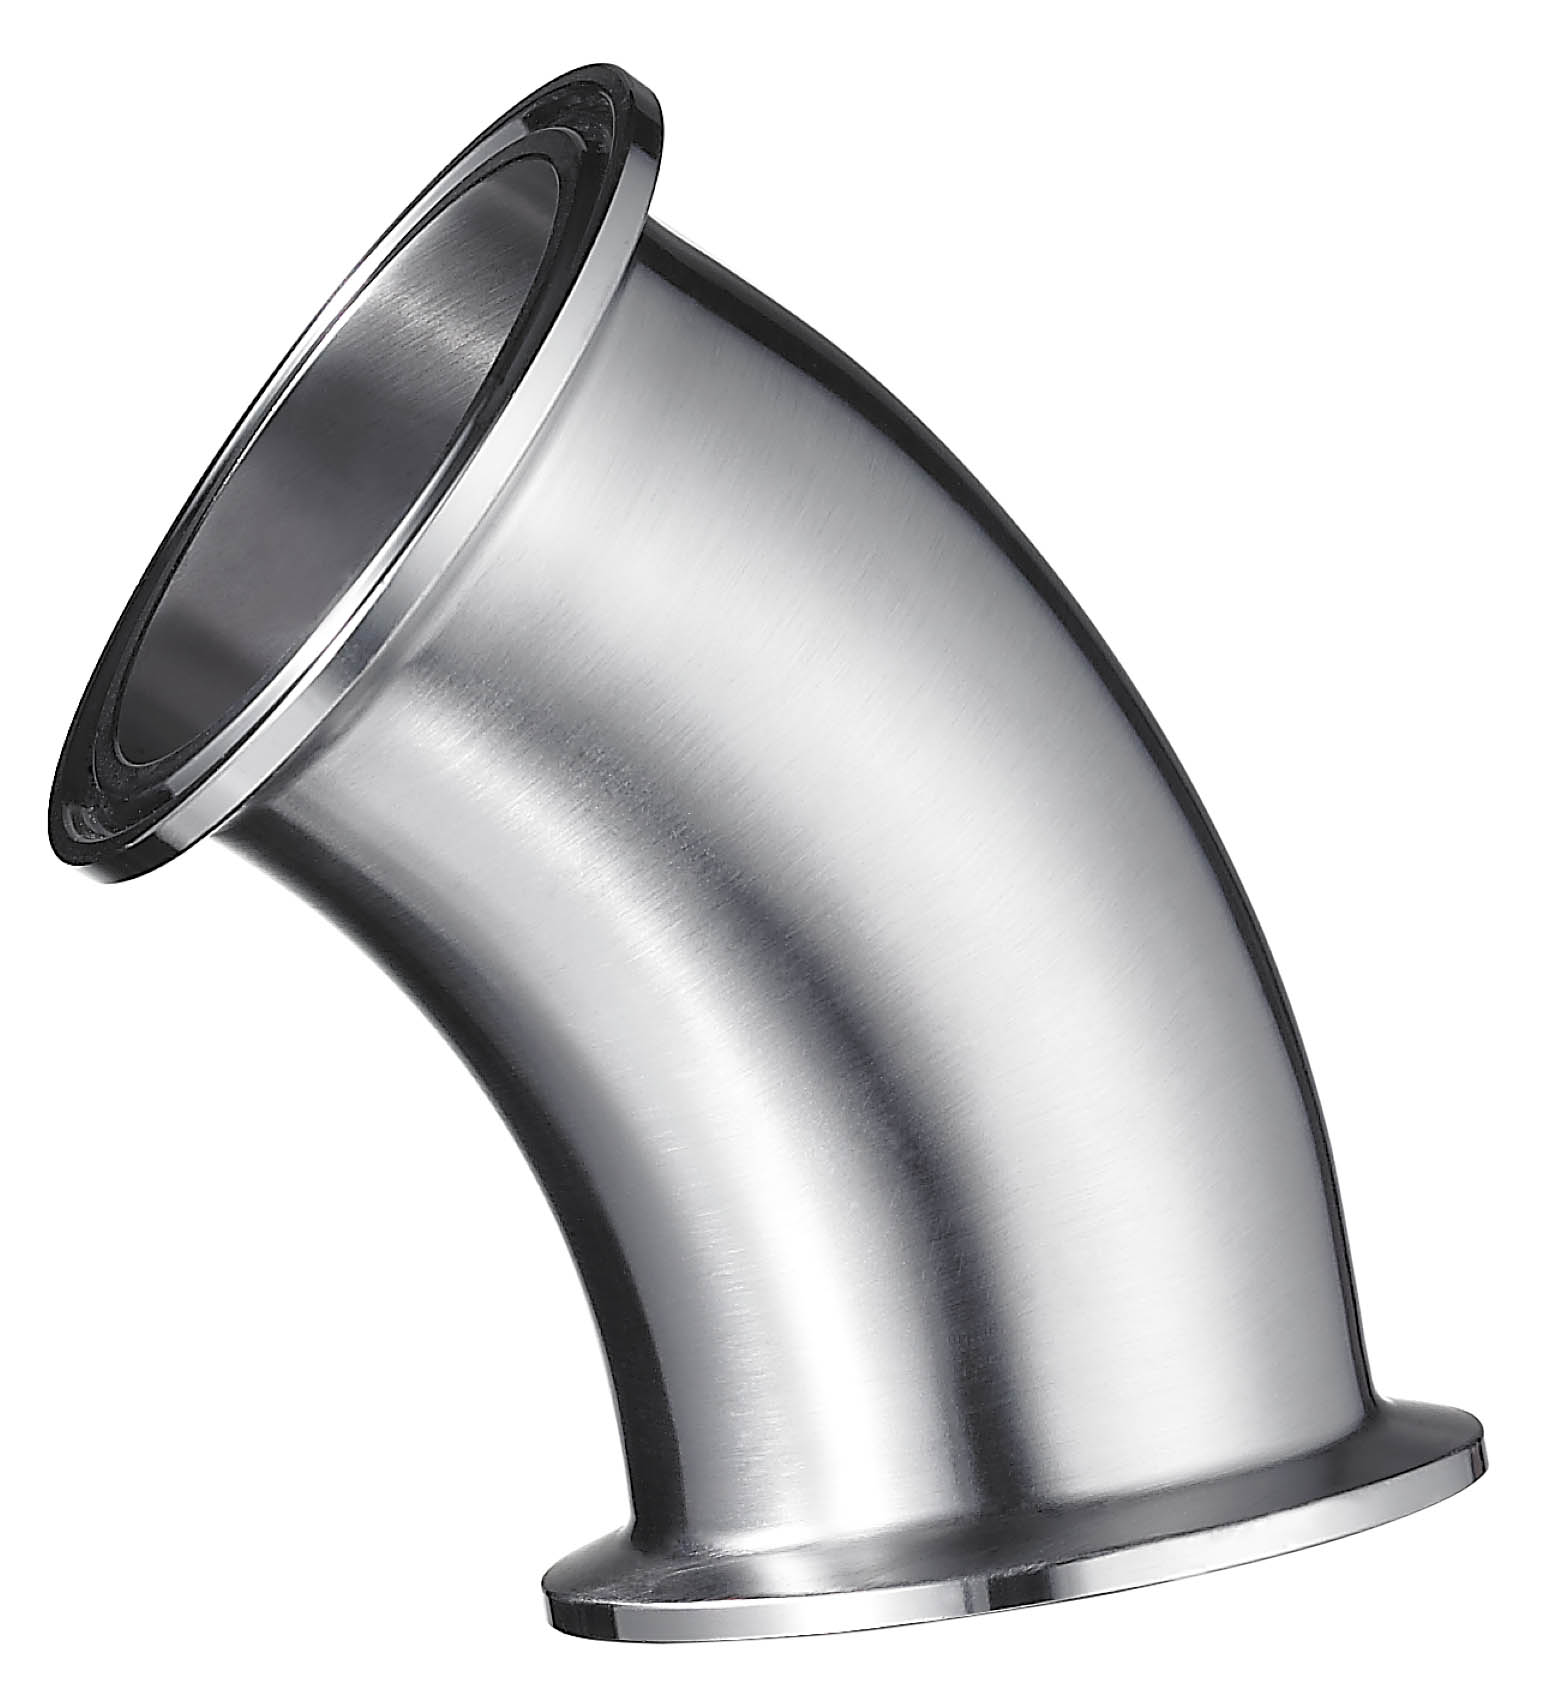 Stainless Steel Sanitary ISO-2CMP ISO/IDF JN-FT-20 4005 Tri-clamp 90 Degree Elbow ferrule